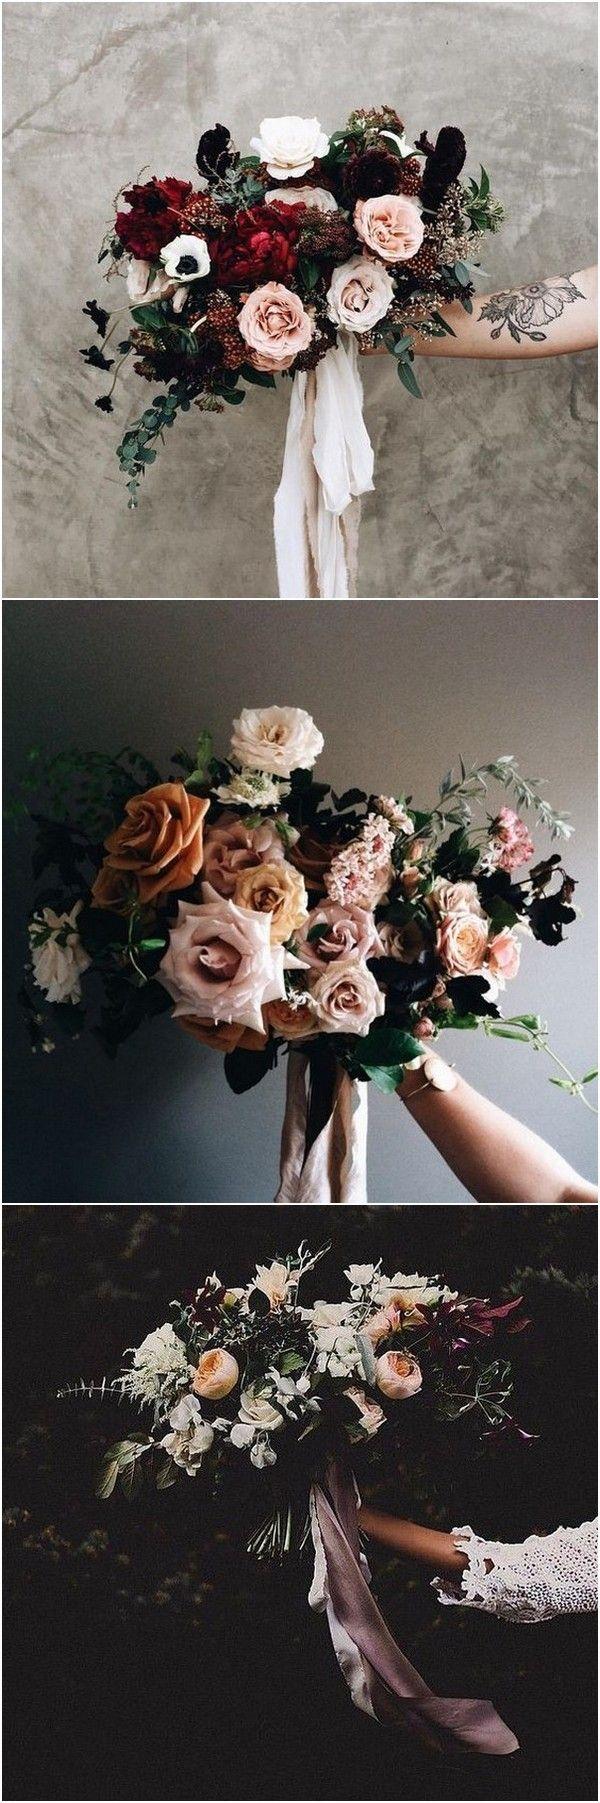 Wedding - Top 25 Moody Wedding Bouquets For 2018 Trends